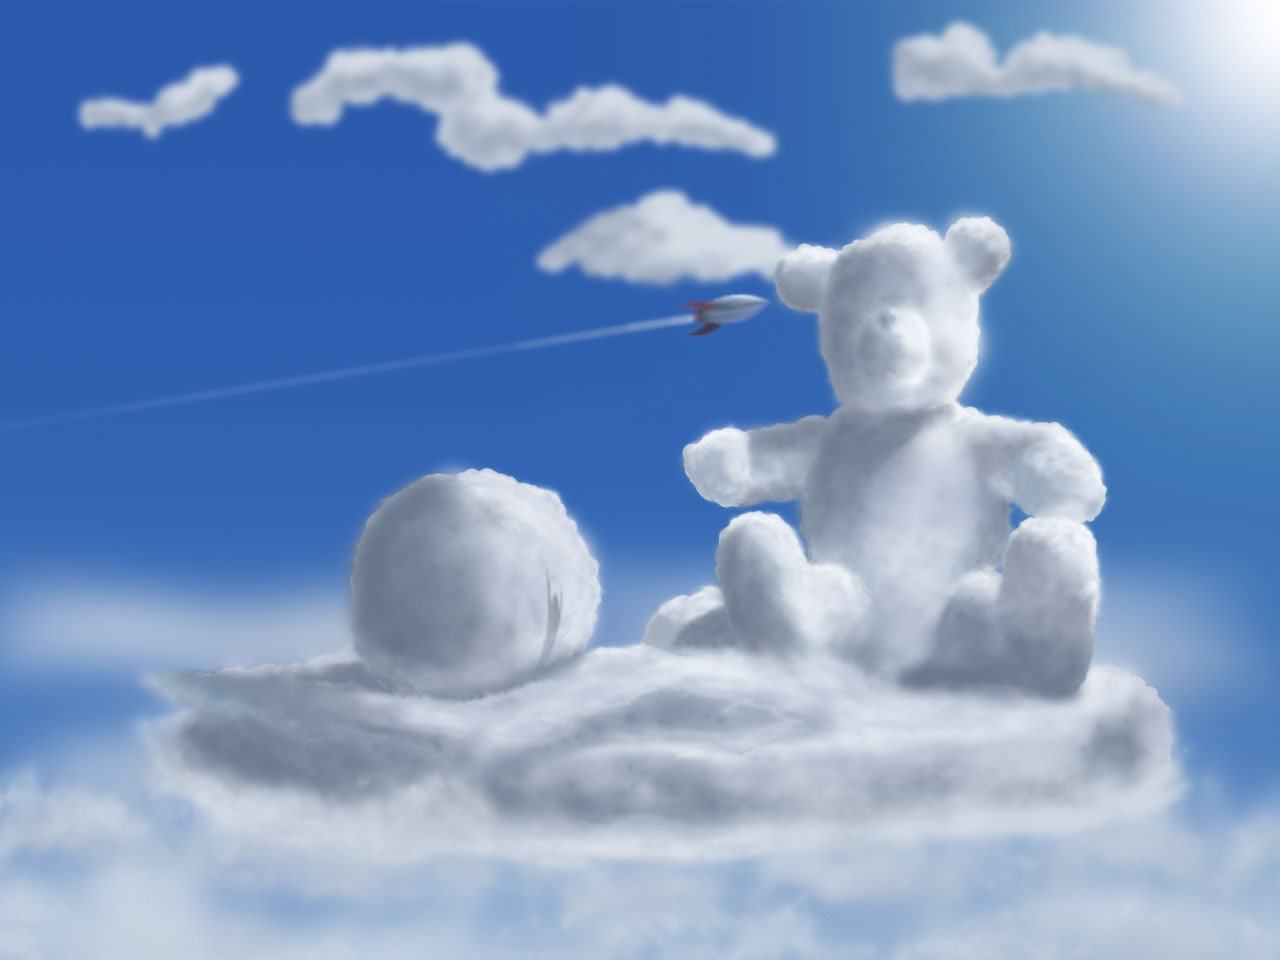  Free Wallpapers Backgrounds   cloud teddy bear clouds funny heaven sky